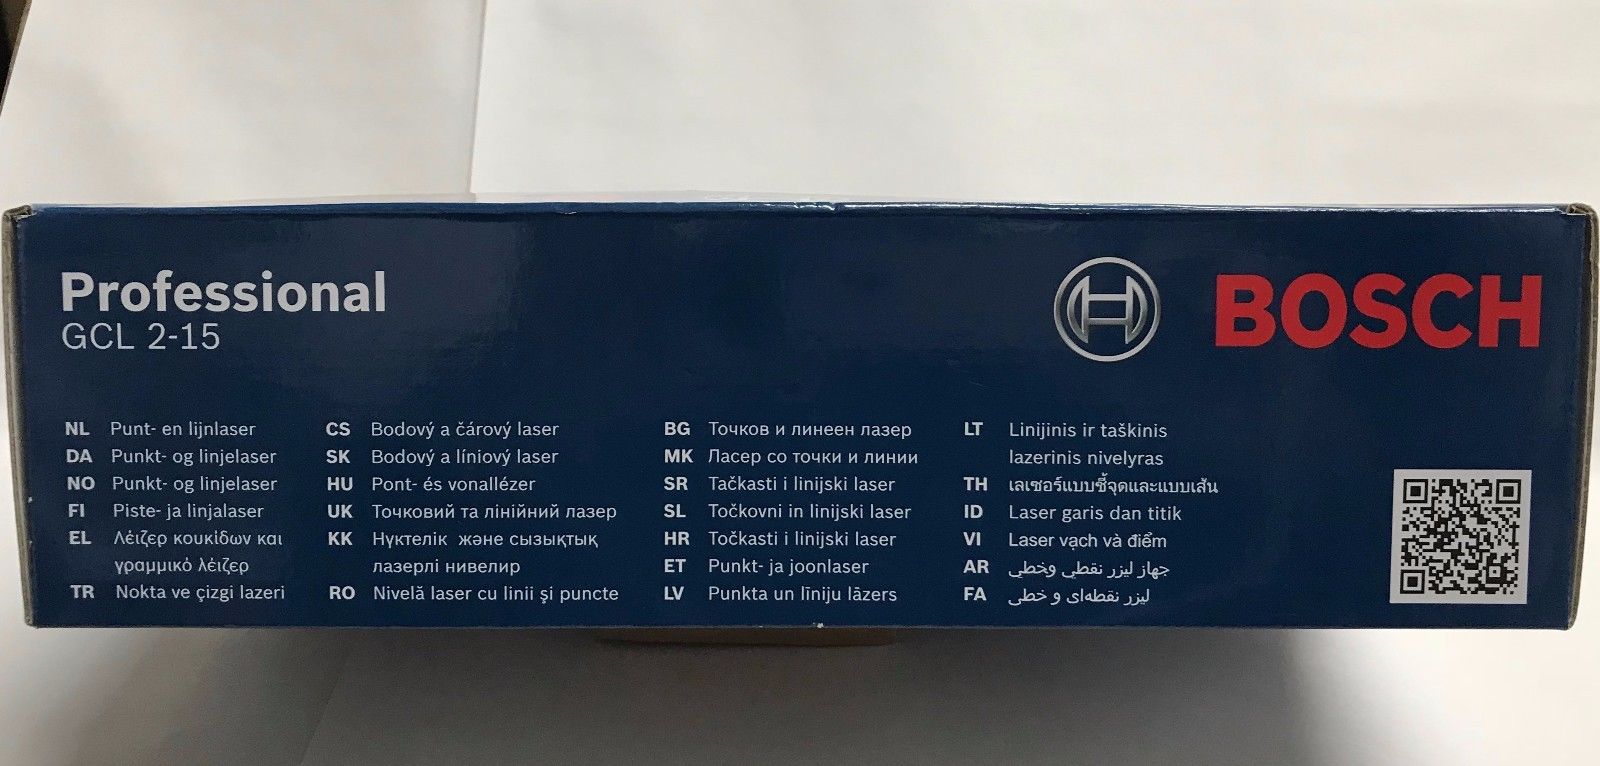 Information on the box